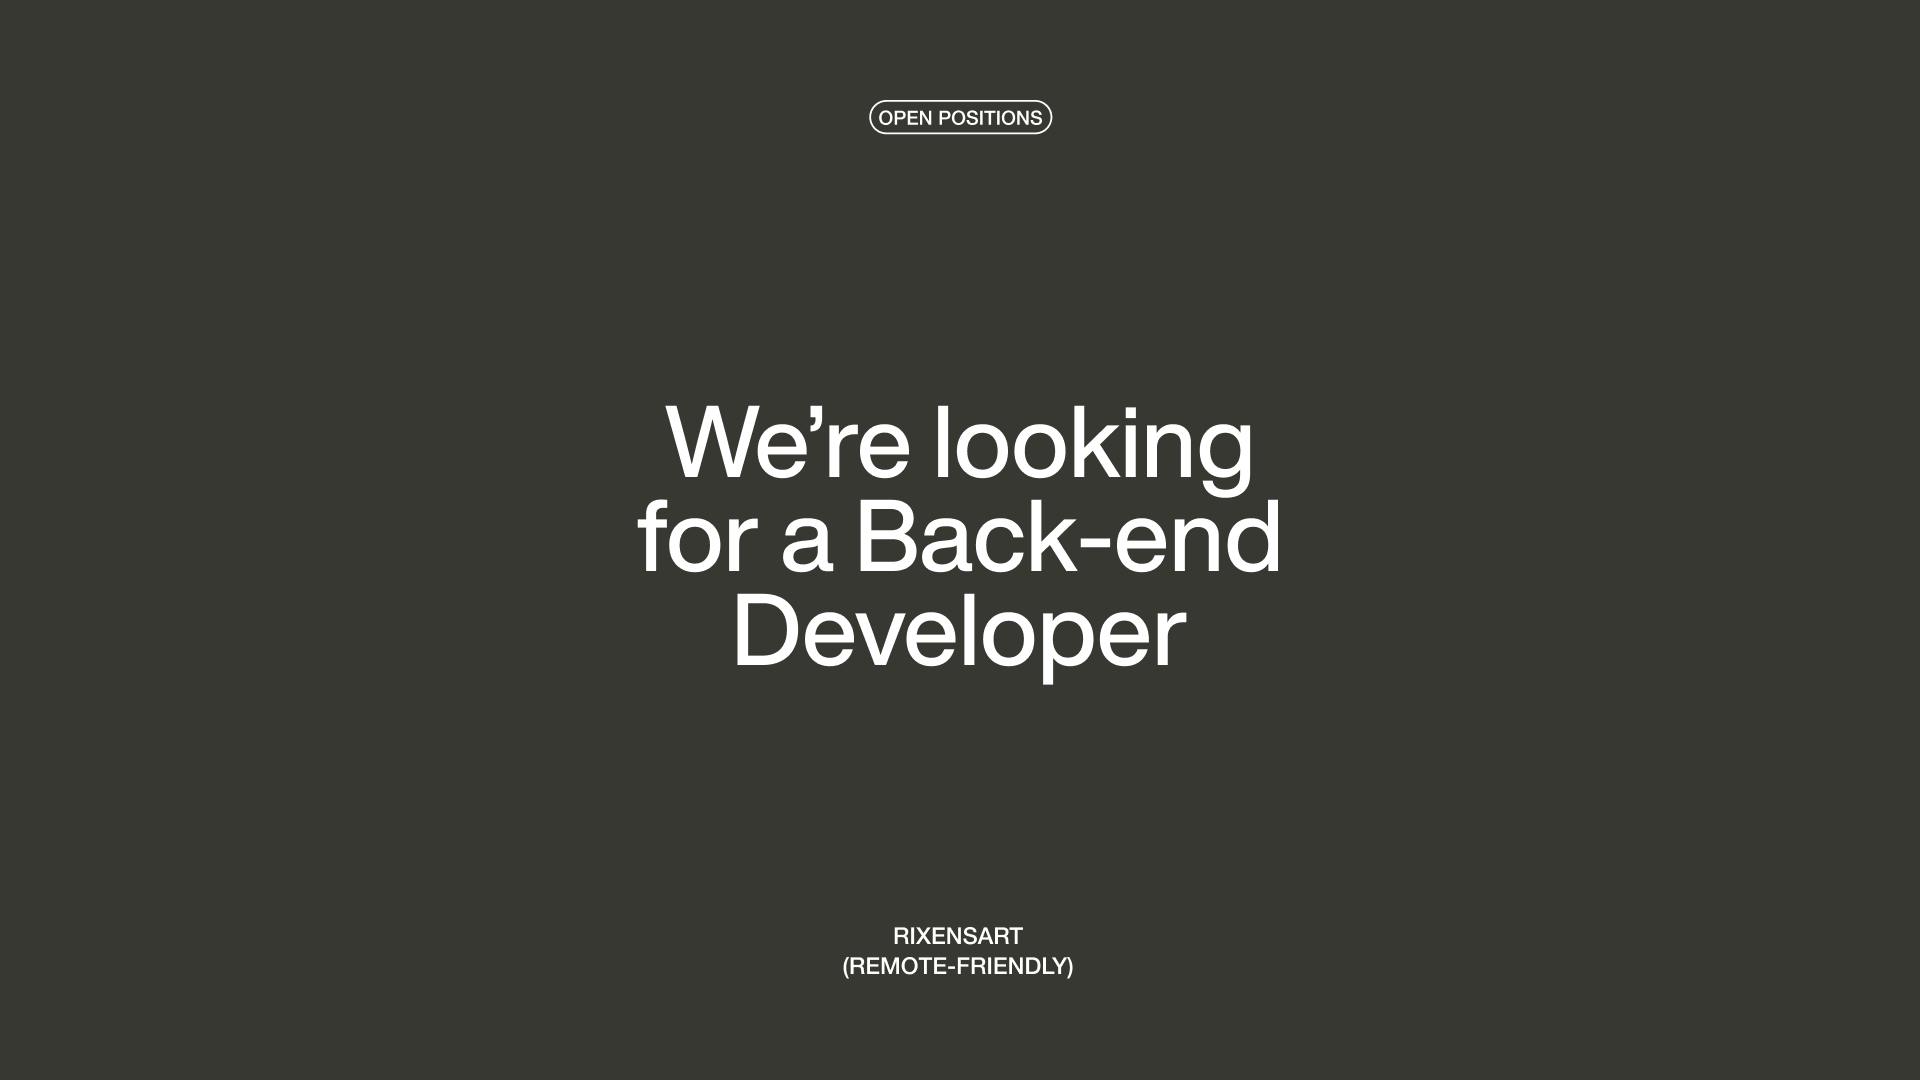 We're looking for a 
motivated Back-end Developer.